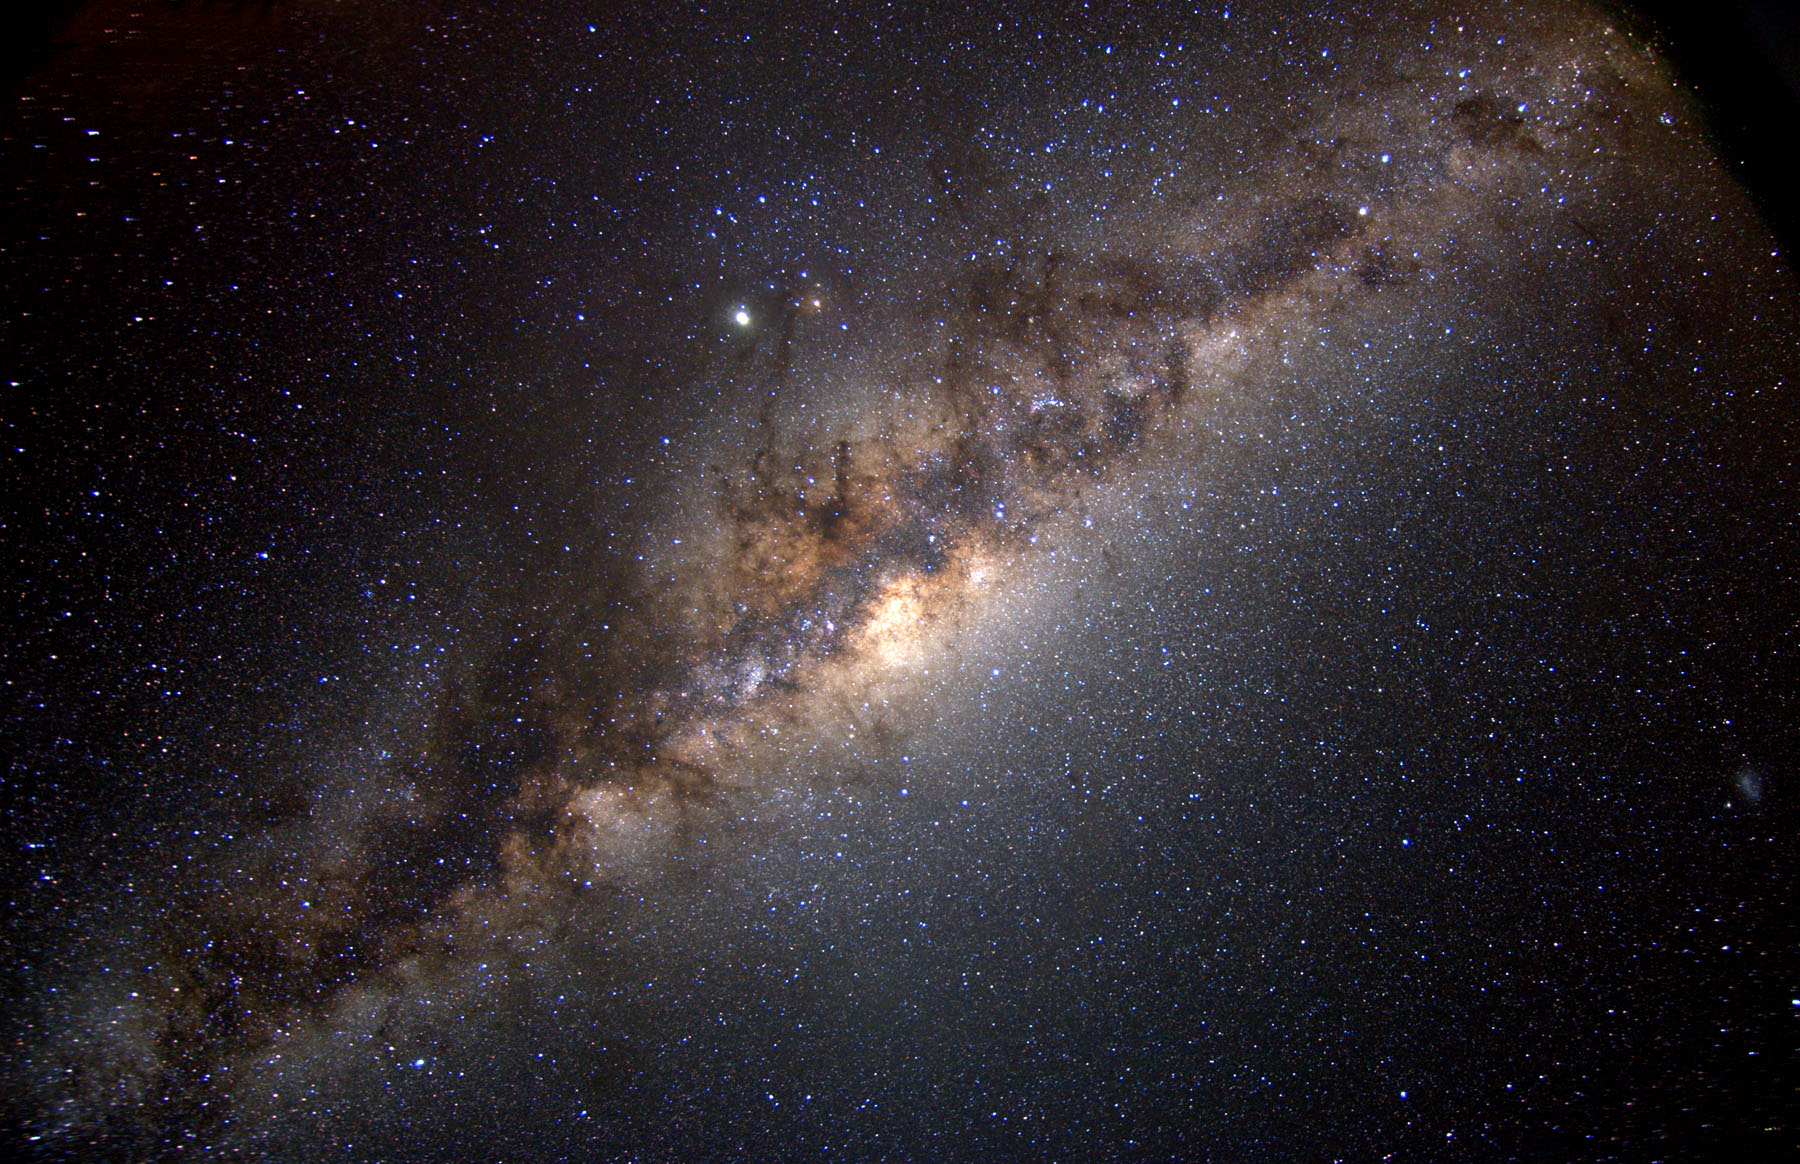 APOD: 2008 January 4 - The Milky Way at 5000 Meters